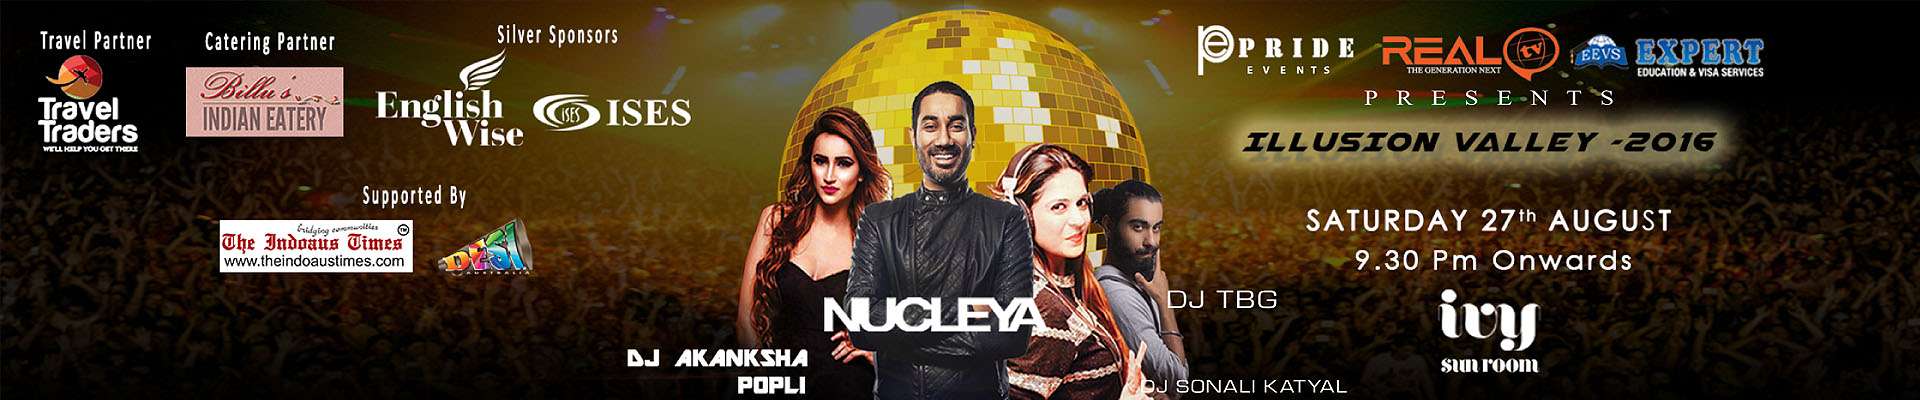 Nucleya Live In Sydney - Illusion Valley - 2016